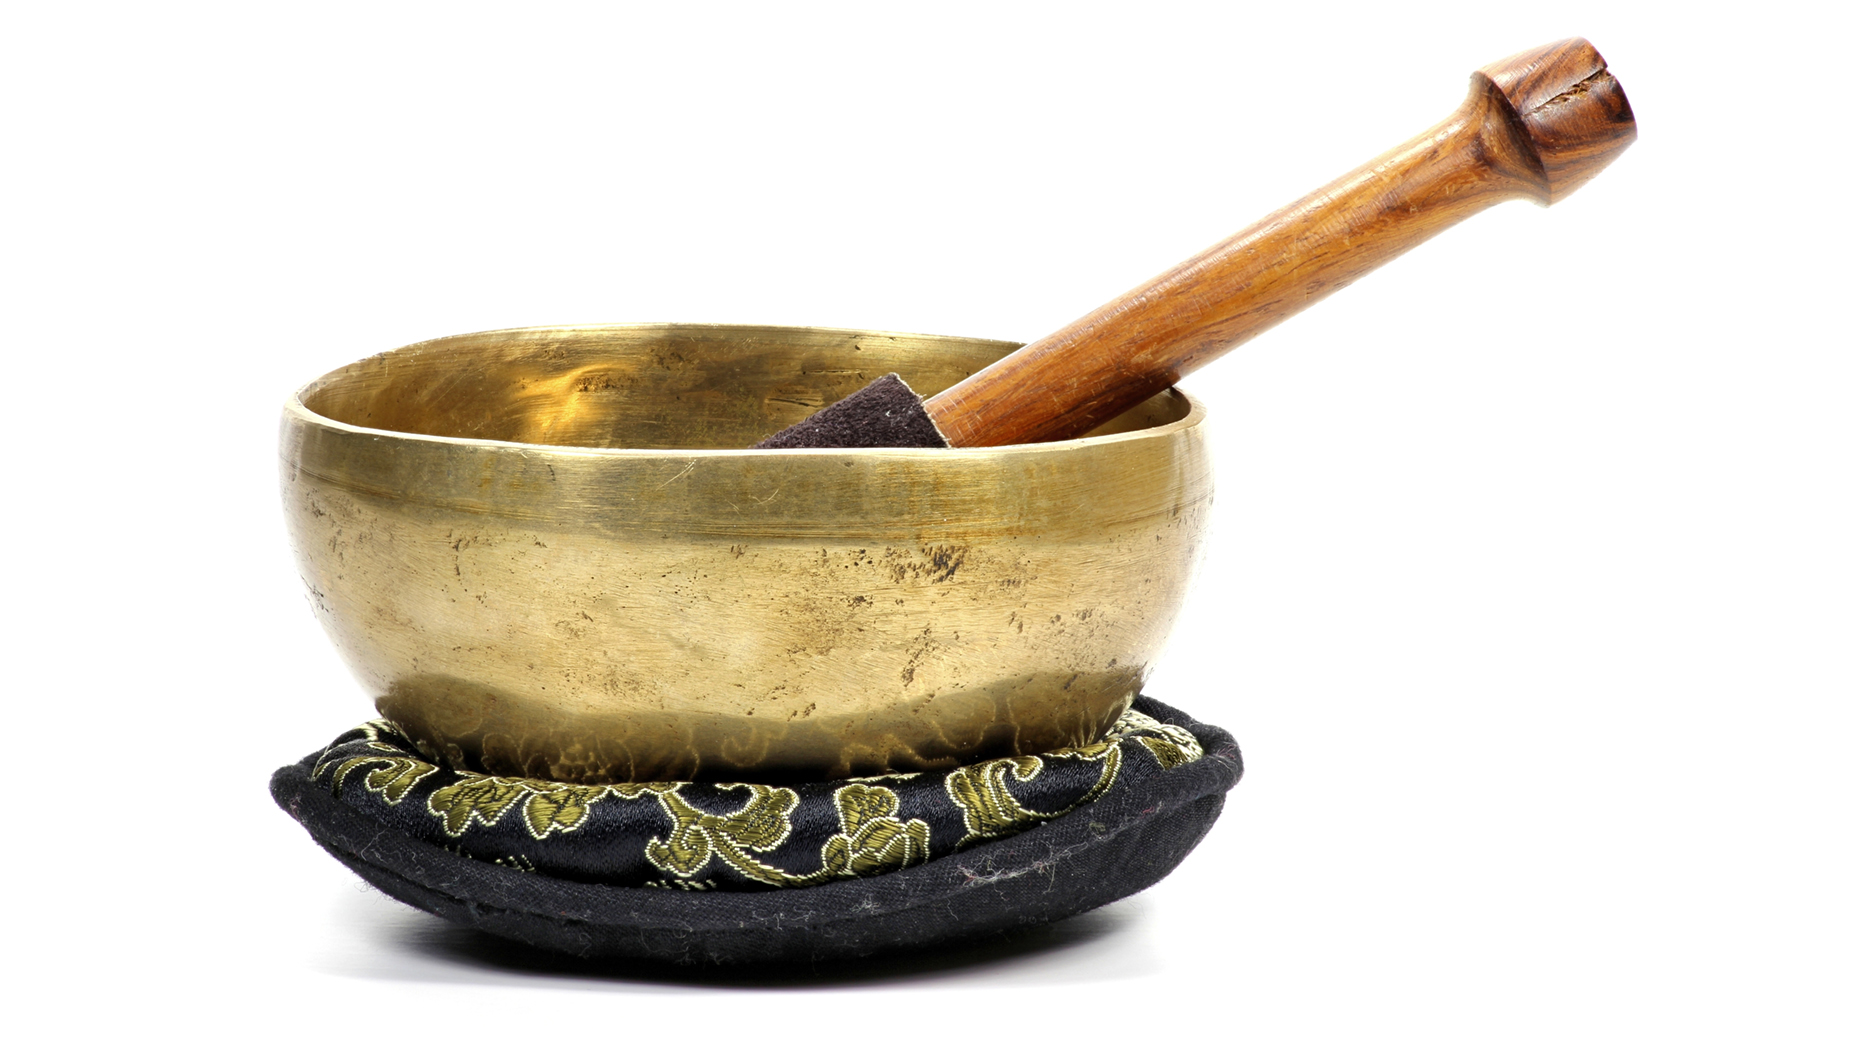 DUBLIN - Foundations in Sound Healing with Tibetan Singing Bowls